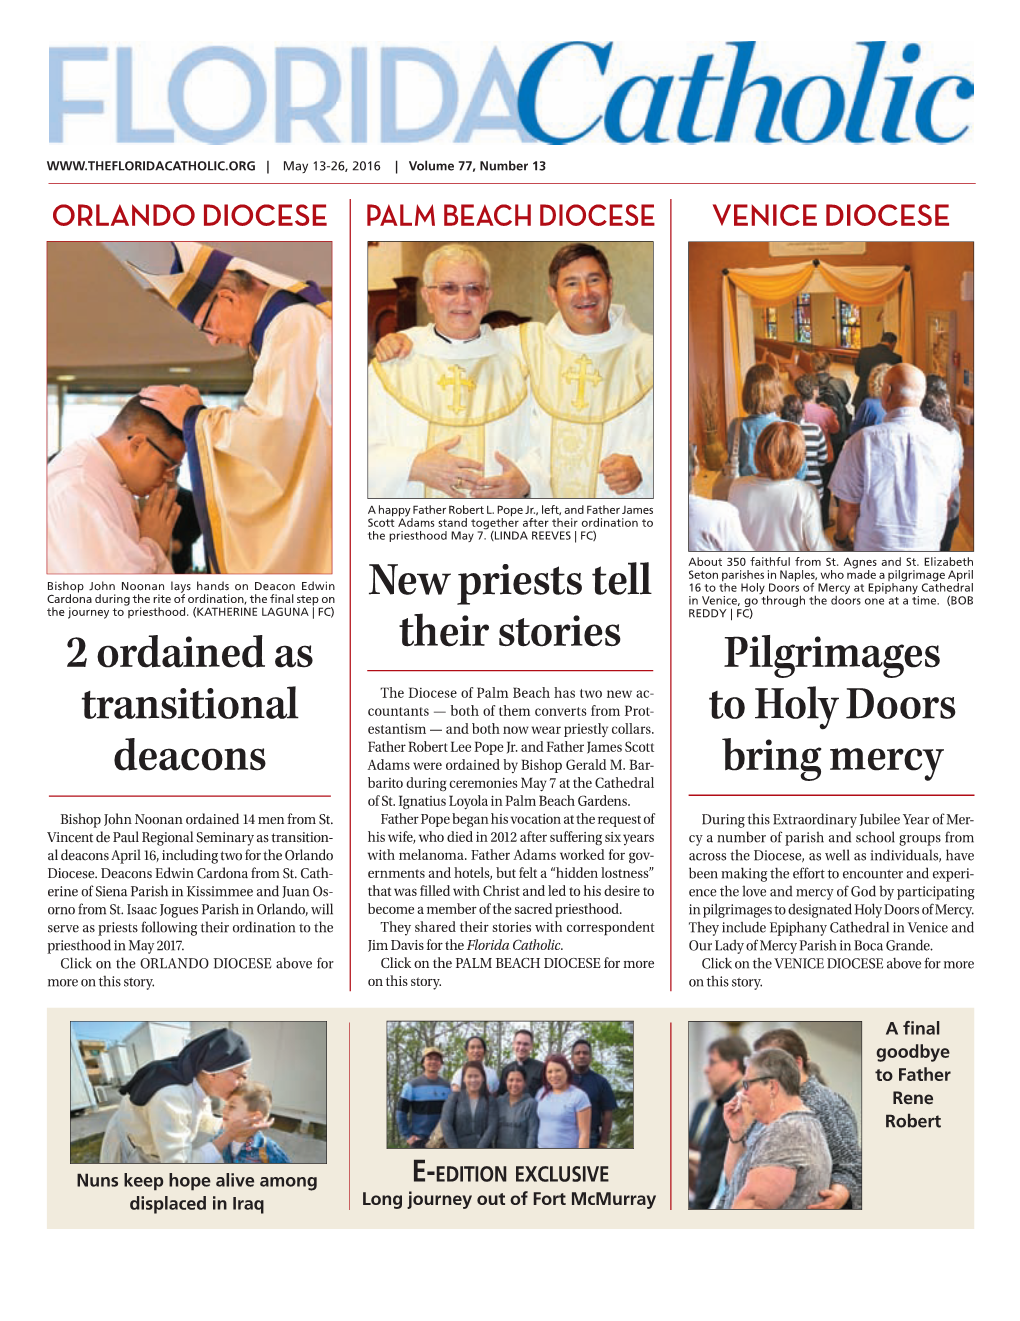 Pilgrimages to Holy Doors Bring Mercy New Priests Tell Their Stories 2 Ordained As Transitional Deacons